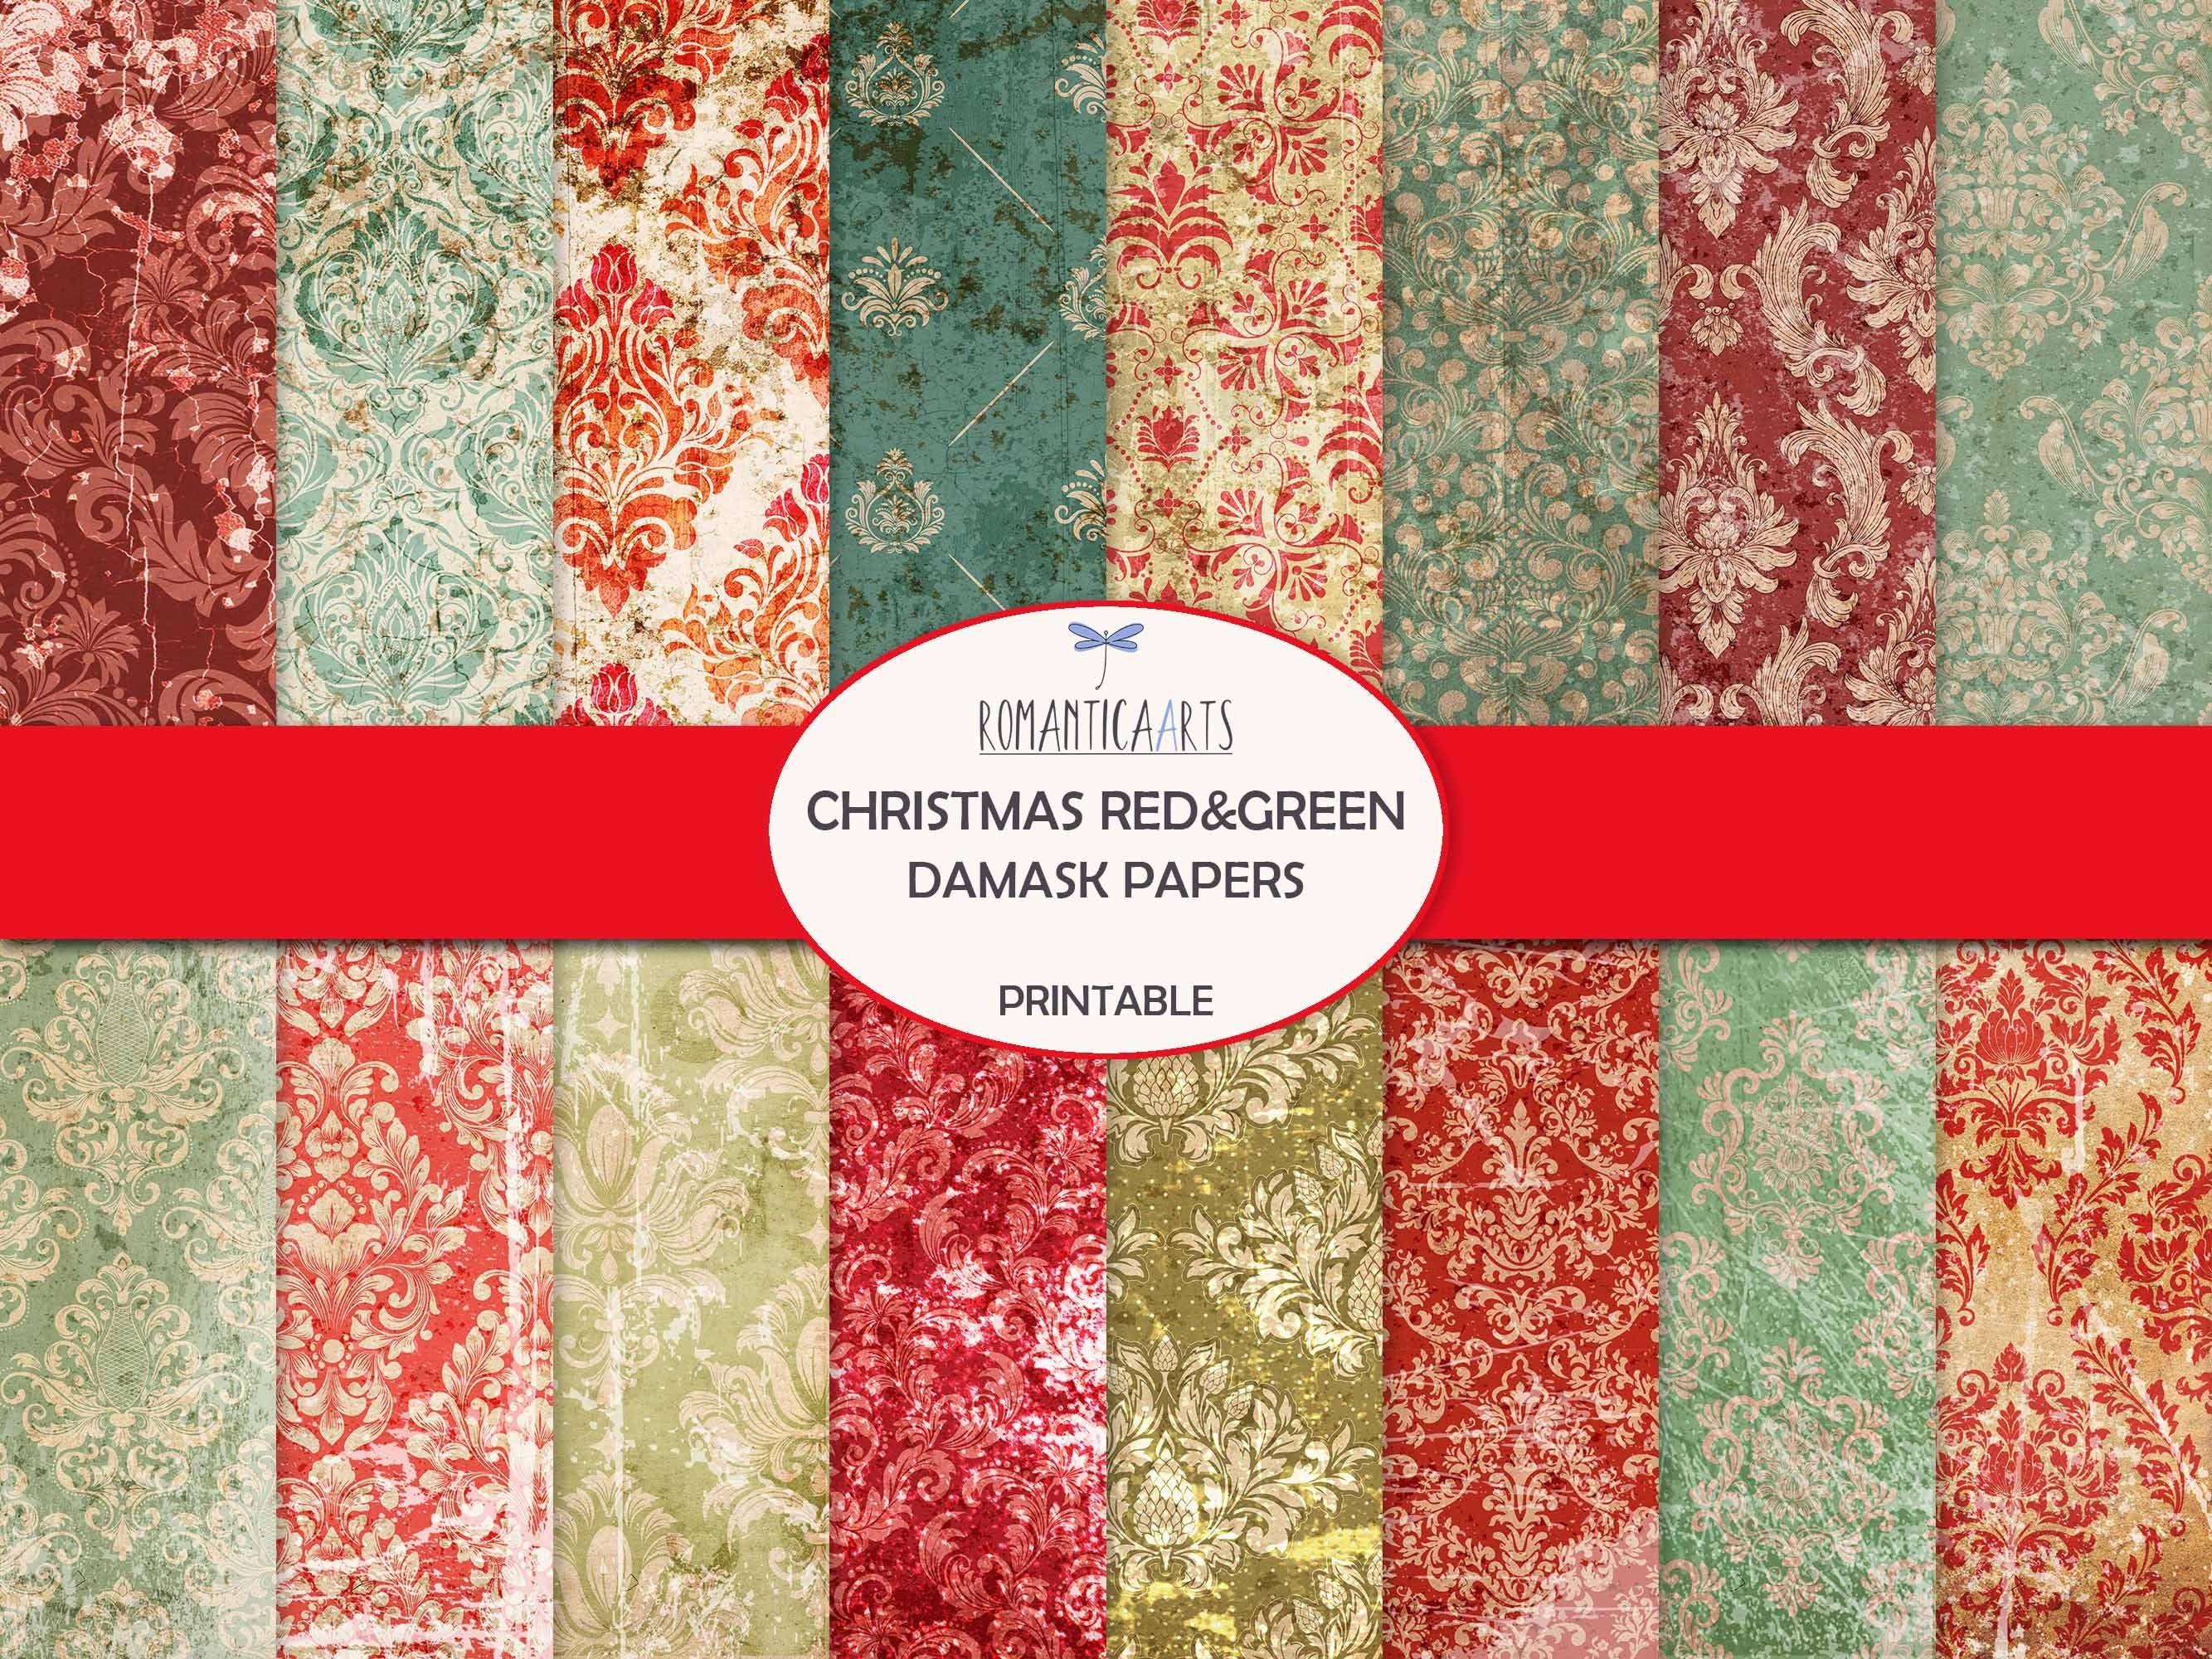 Christmas Red And Green Damask Paper, Digital Damask Paper, Shabby Damask Paper, Grunge Damask Background, Christmas Journal